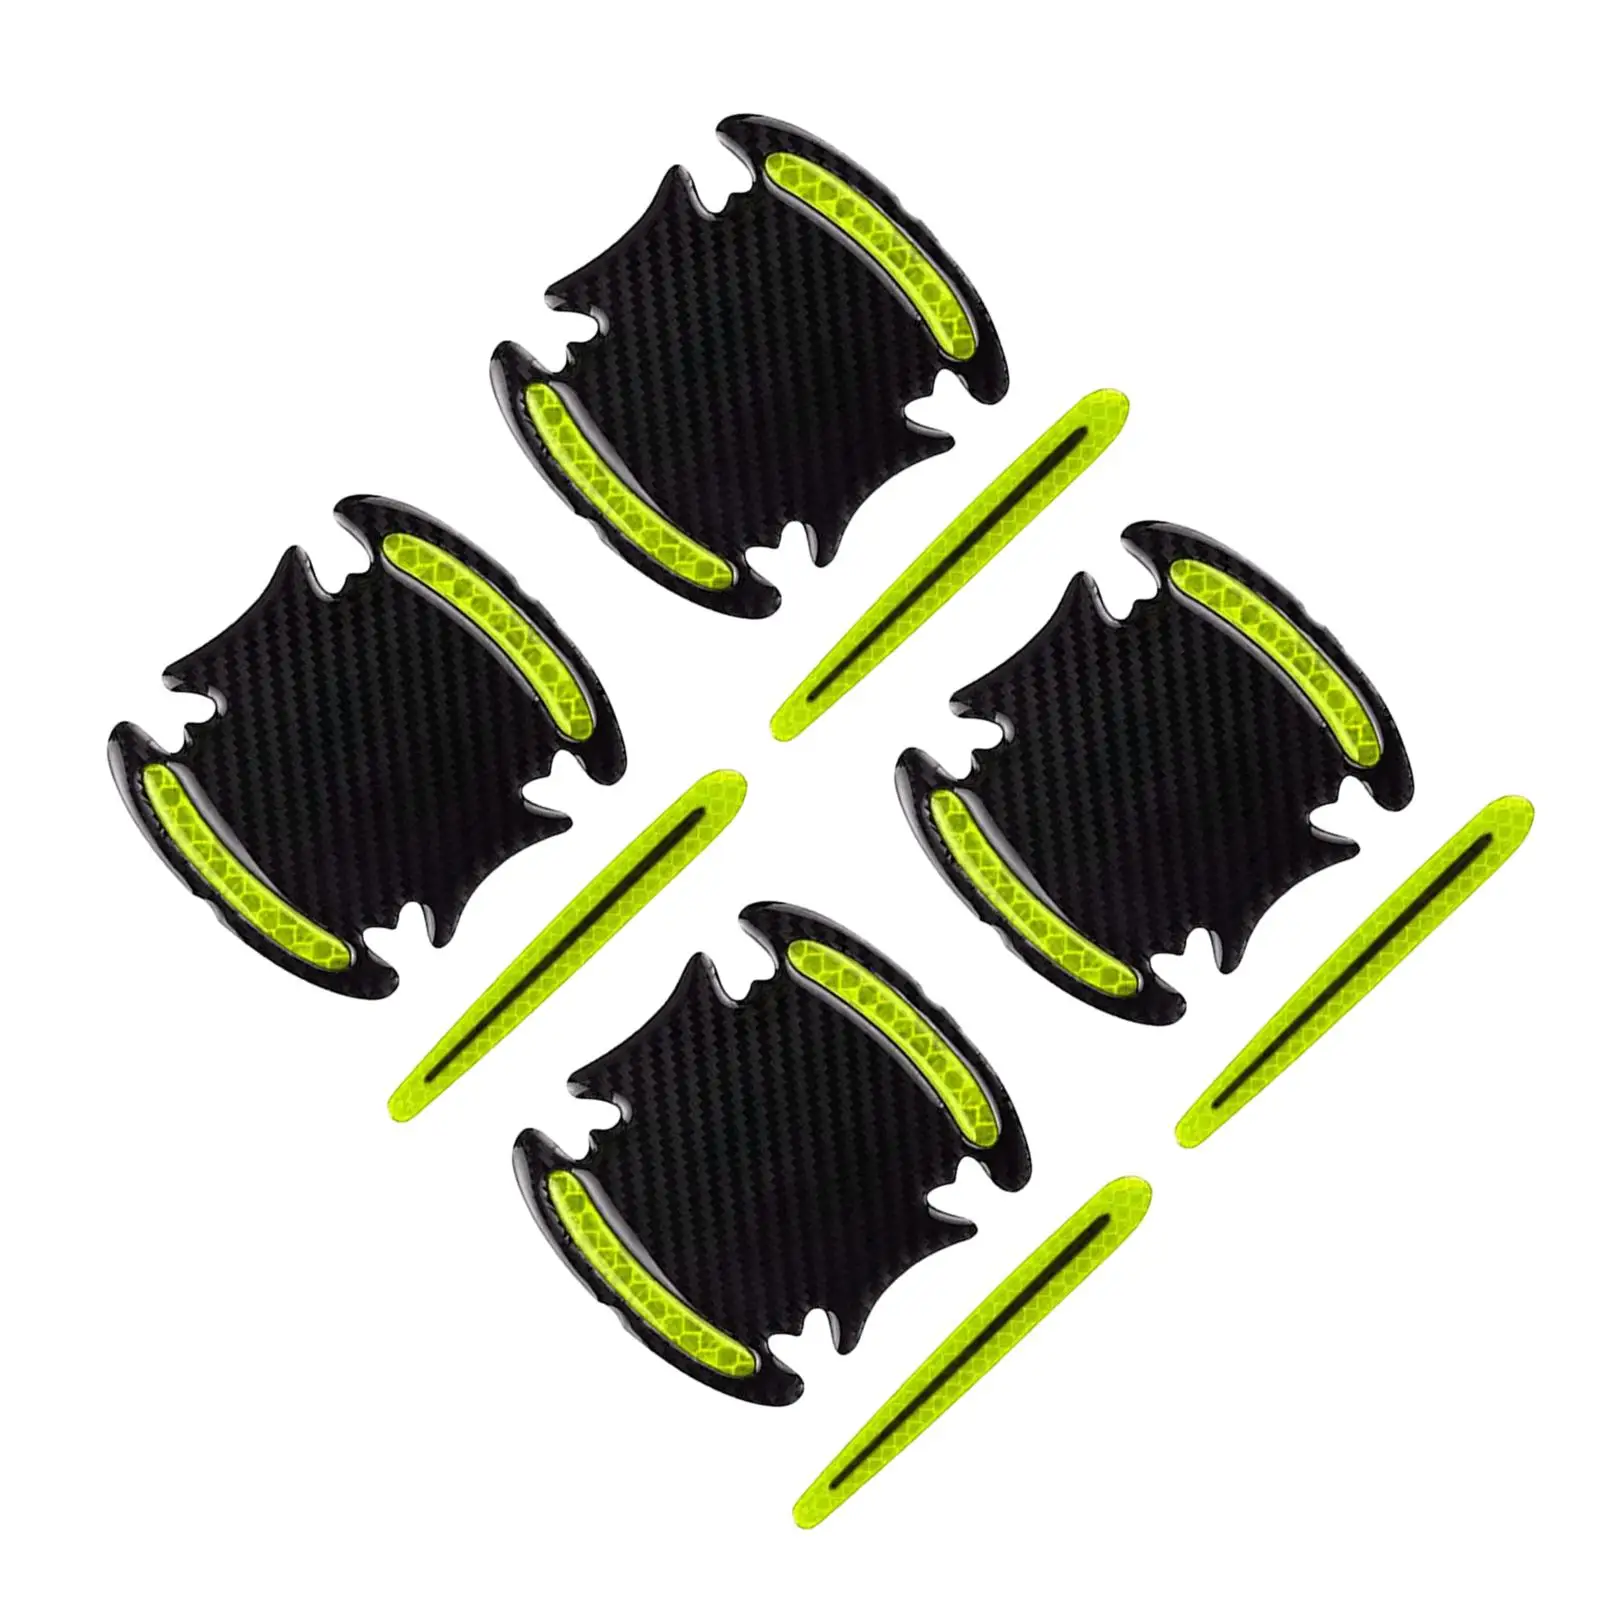 8 Pieces Universal Car Door Handle Scratch Protector Reflective Strips Stickers Covers Accessory Warning Marker Protective Films